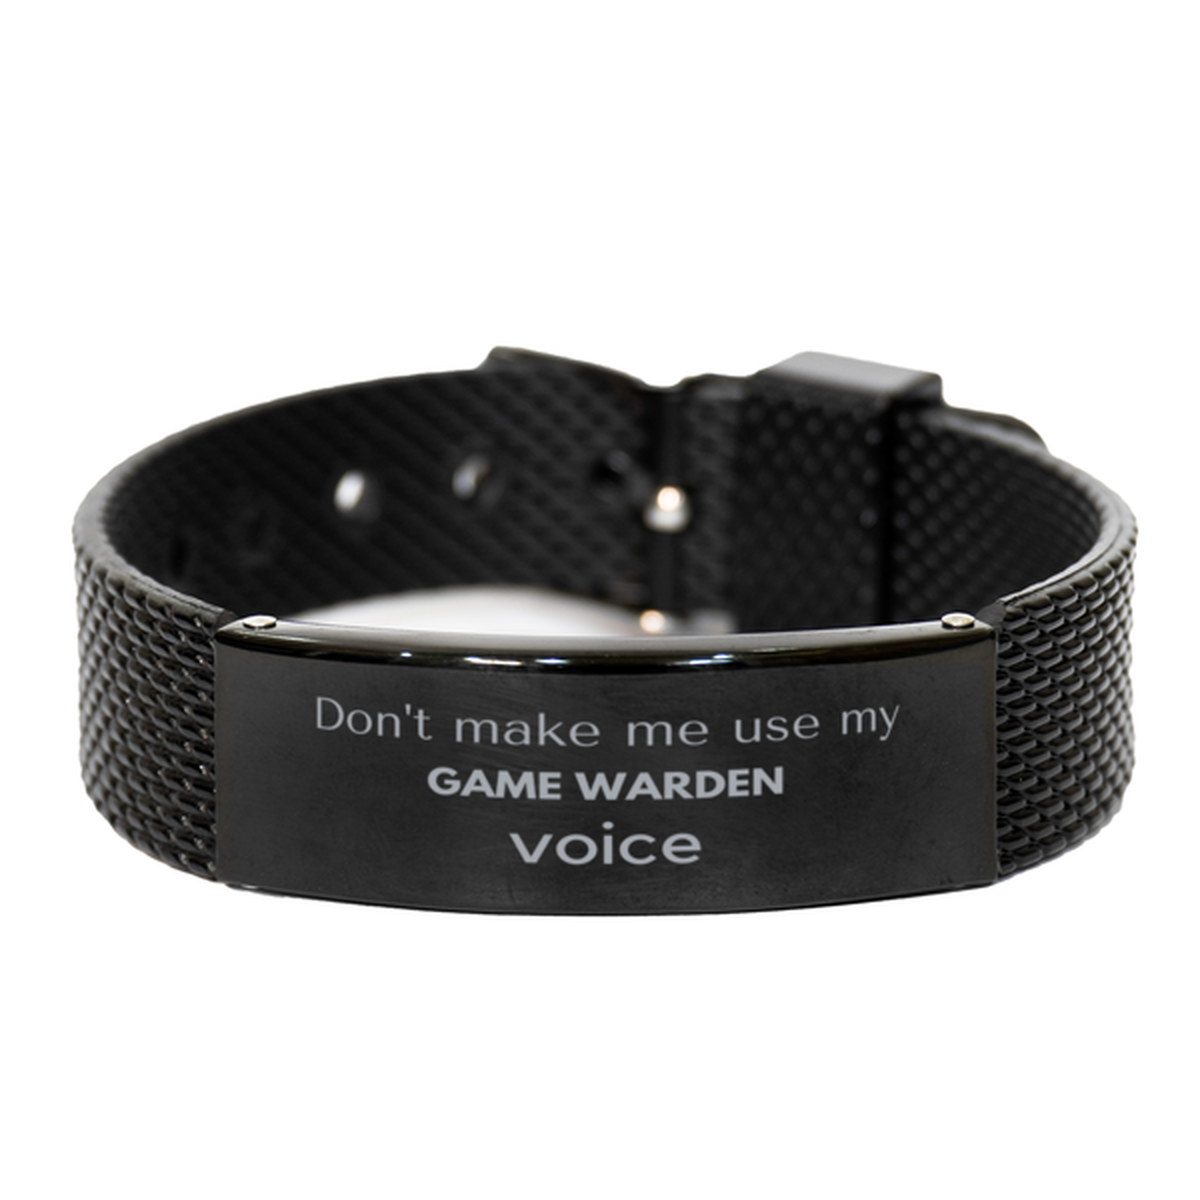 Don't make me use my Game Warden voice, Sarcasm Game Warden Gifts, Christmas Game Warden Black Shark Mesh Bracelet Birthday Unique Gifts For Game Warden Coworkers, Men, Women, Colleague, Friends